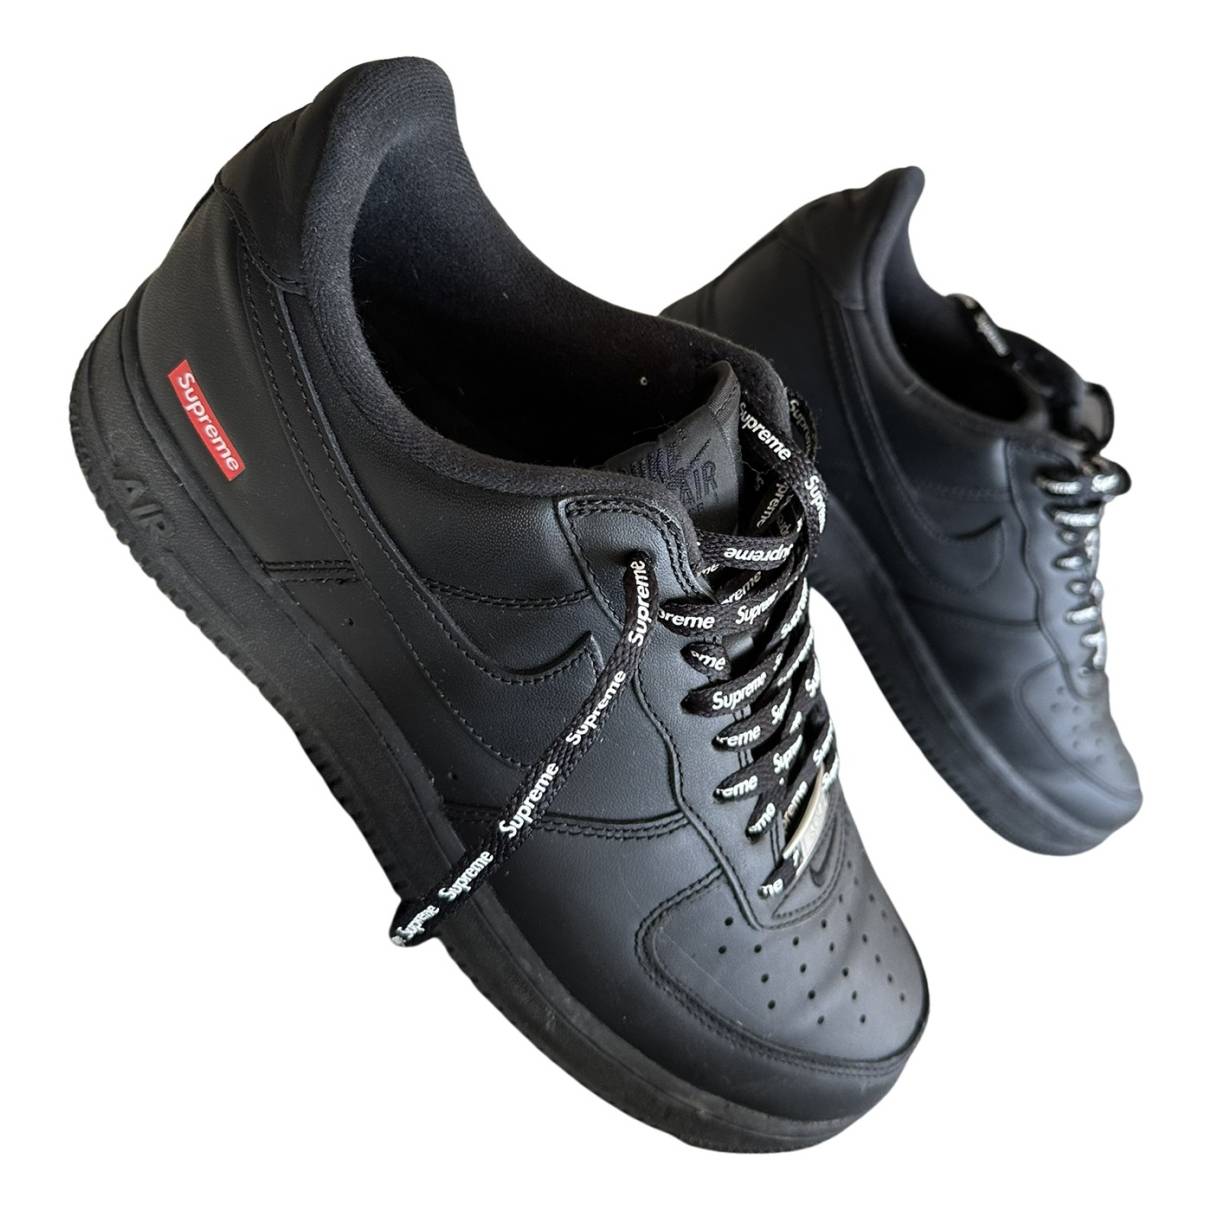 Air force 1 leather low trainers Nike x Supreme Black size 42 EU